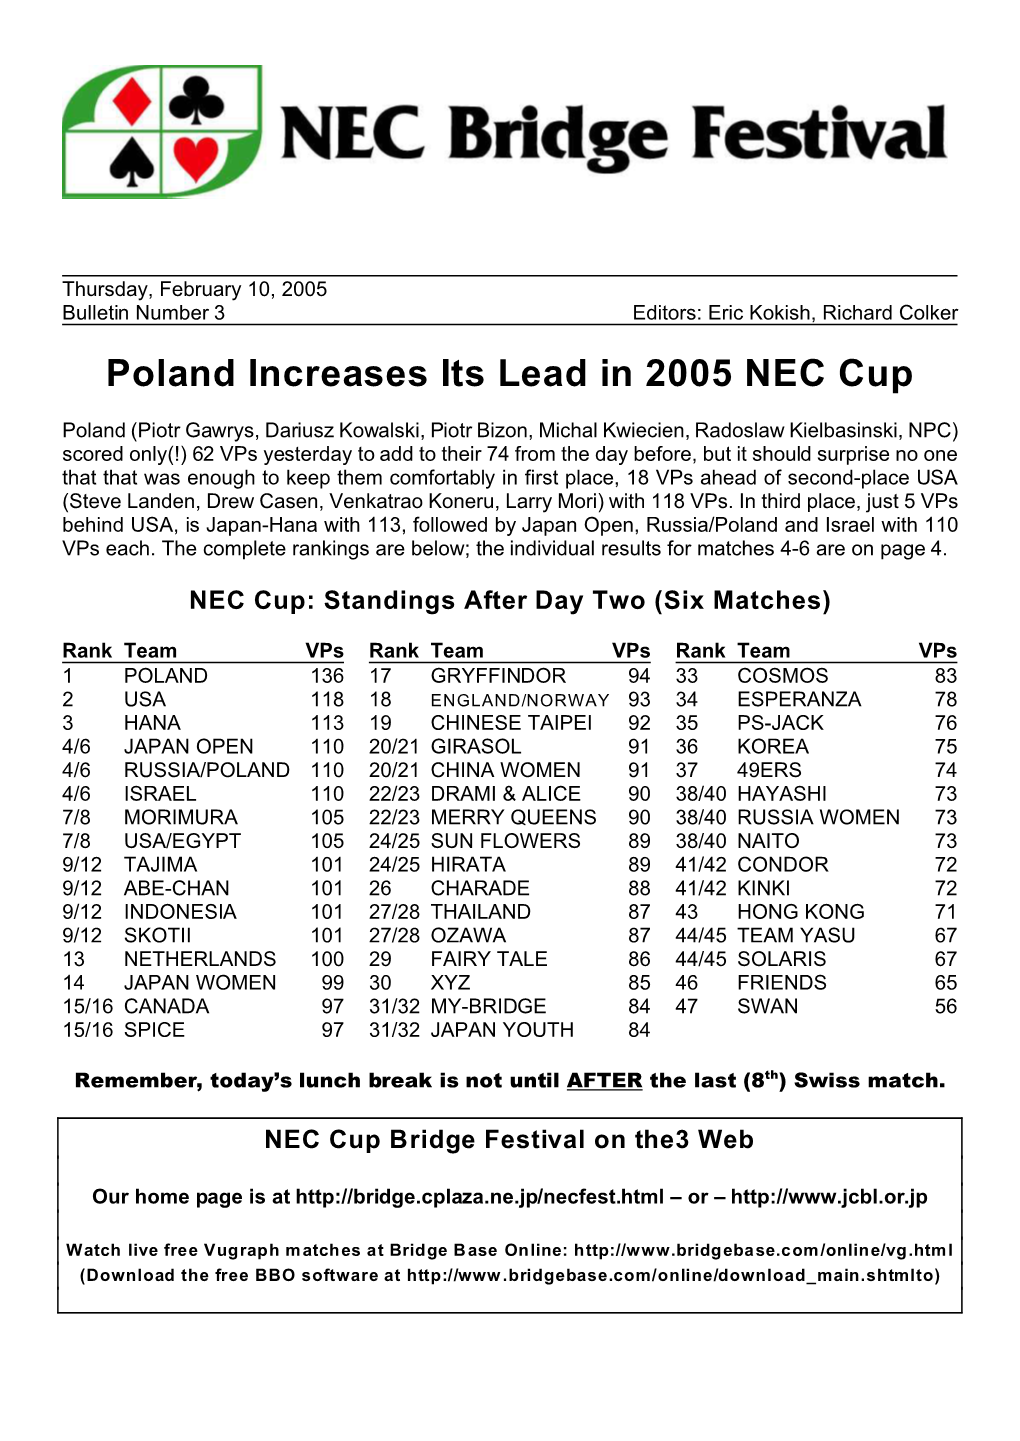 Poland Increases Its Lead in 2005 NEC Cup